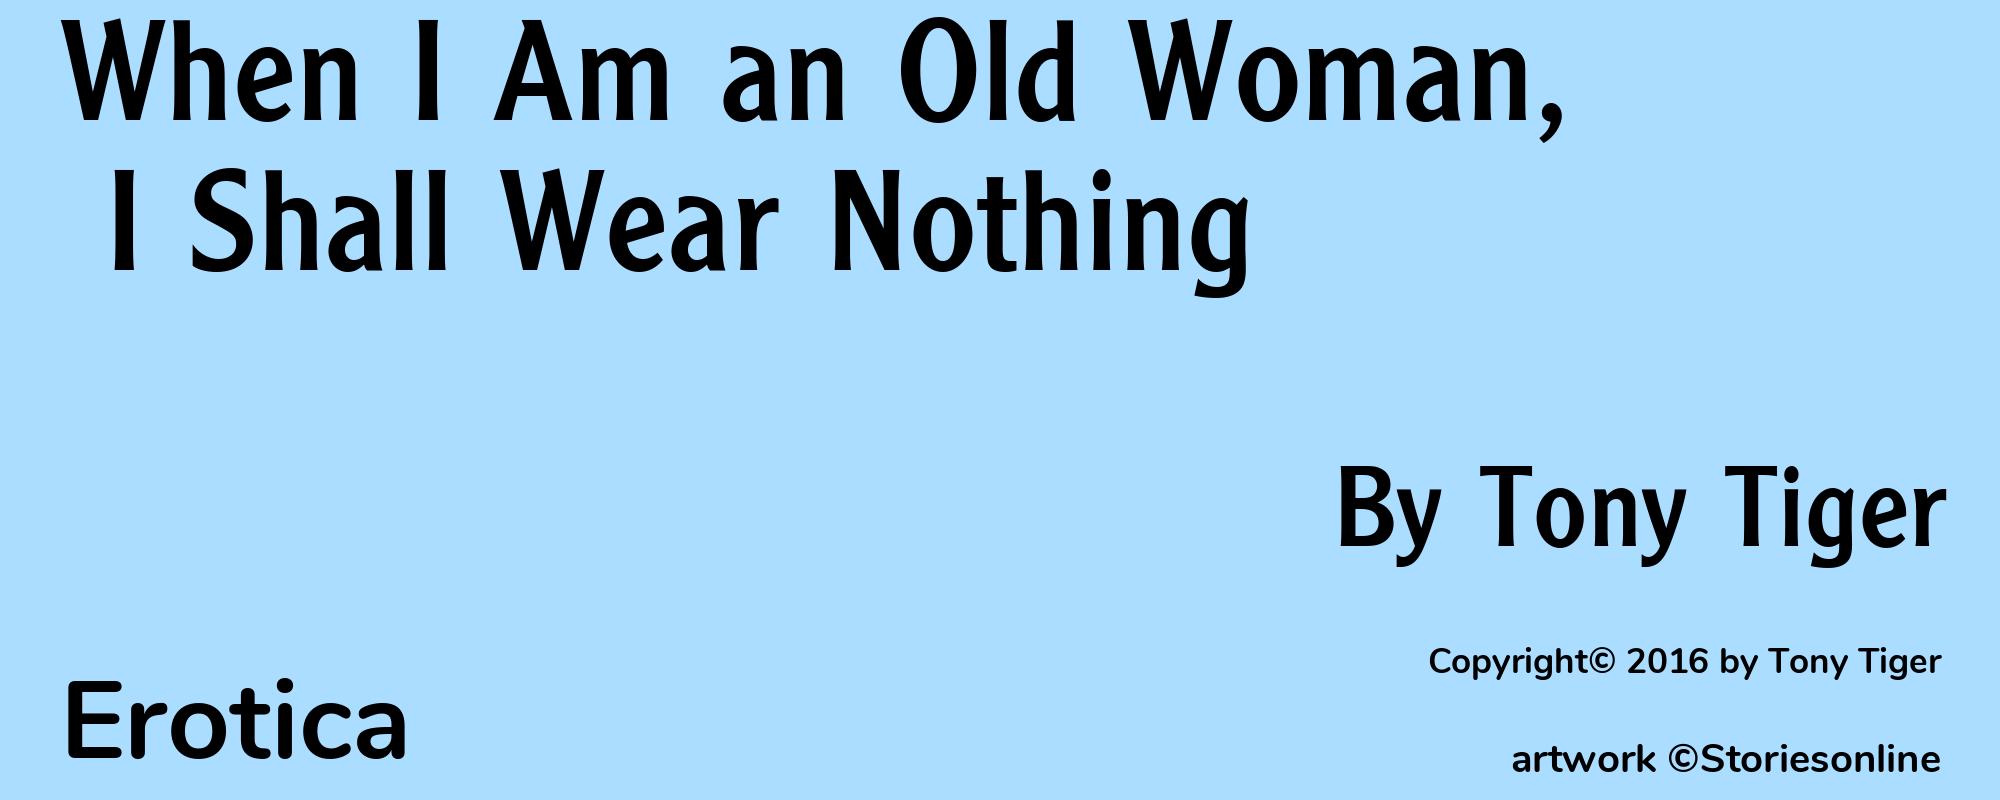 When I Am an Old Woman, I Shall Wear Nothing - Cover